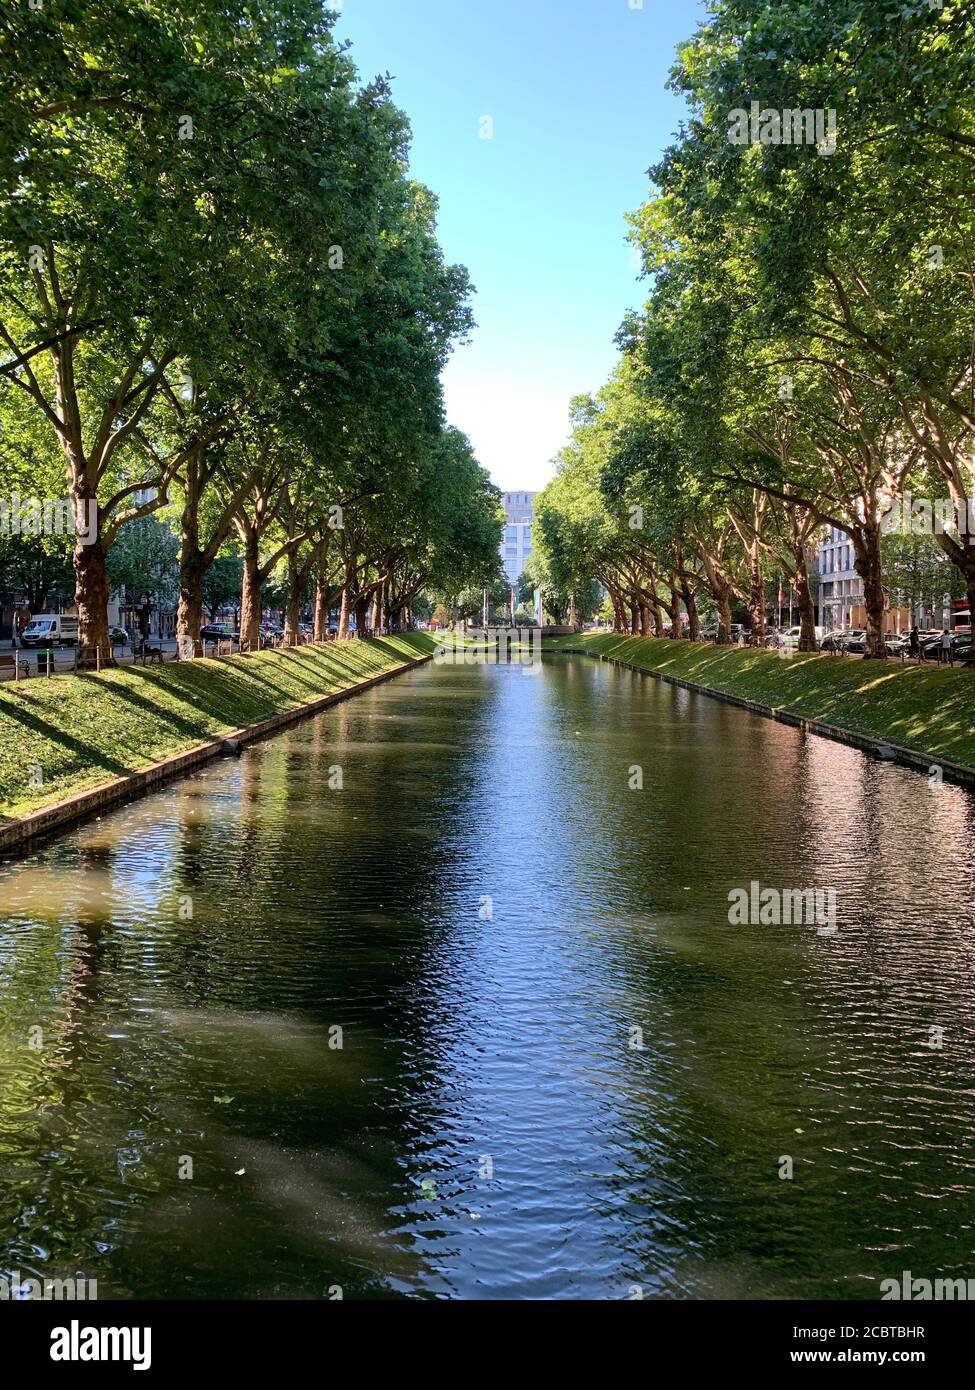 The canal at Koenigsallee (King's Avenue).This street is famous for luxury shopping. Dusseldorf, Germany Stock Photo